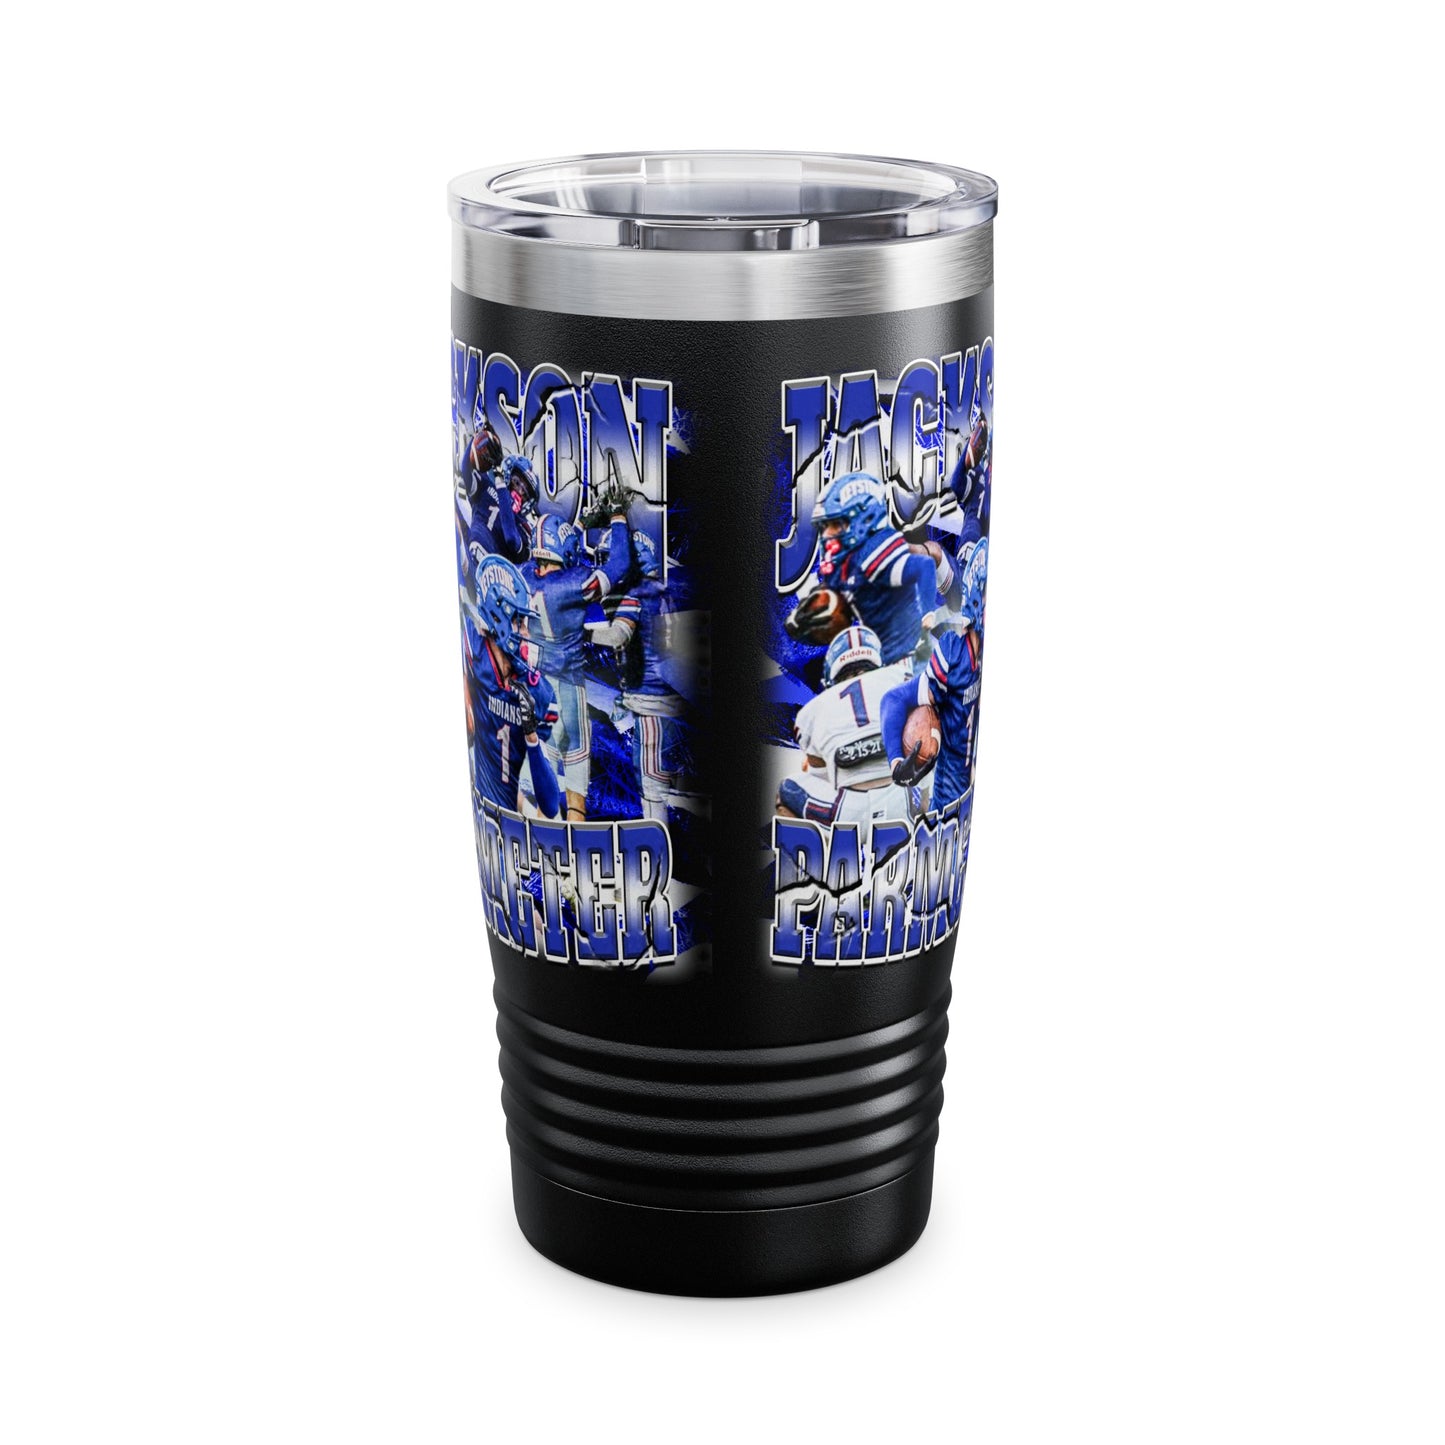 Jackson Parmeter Stainless Steal Tumbler